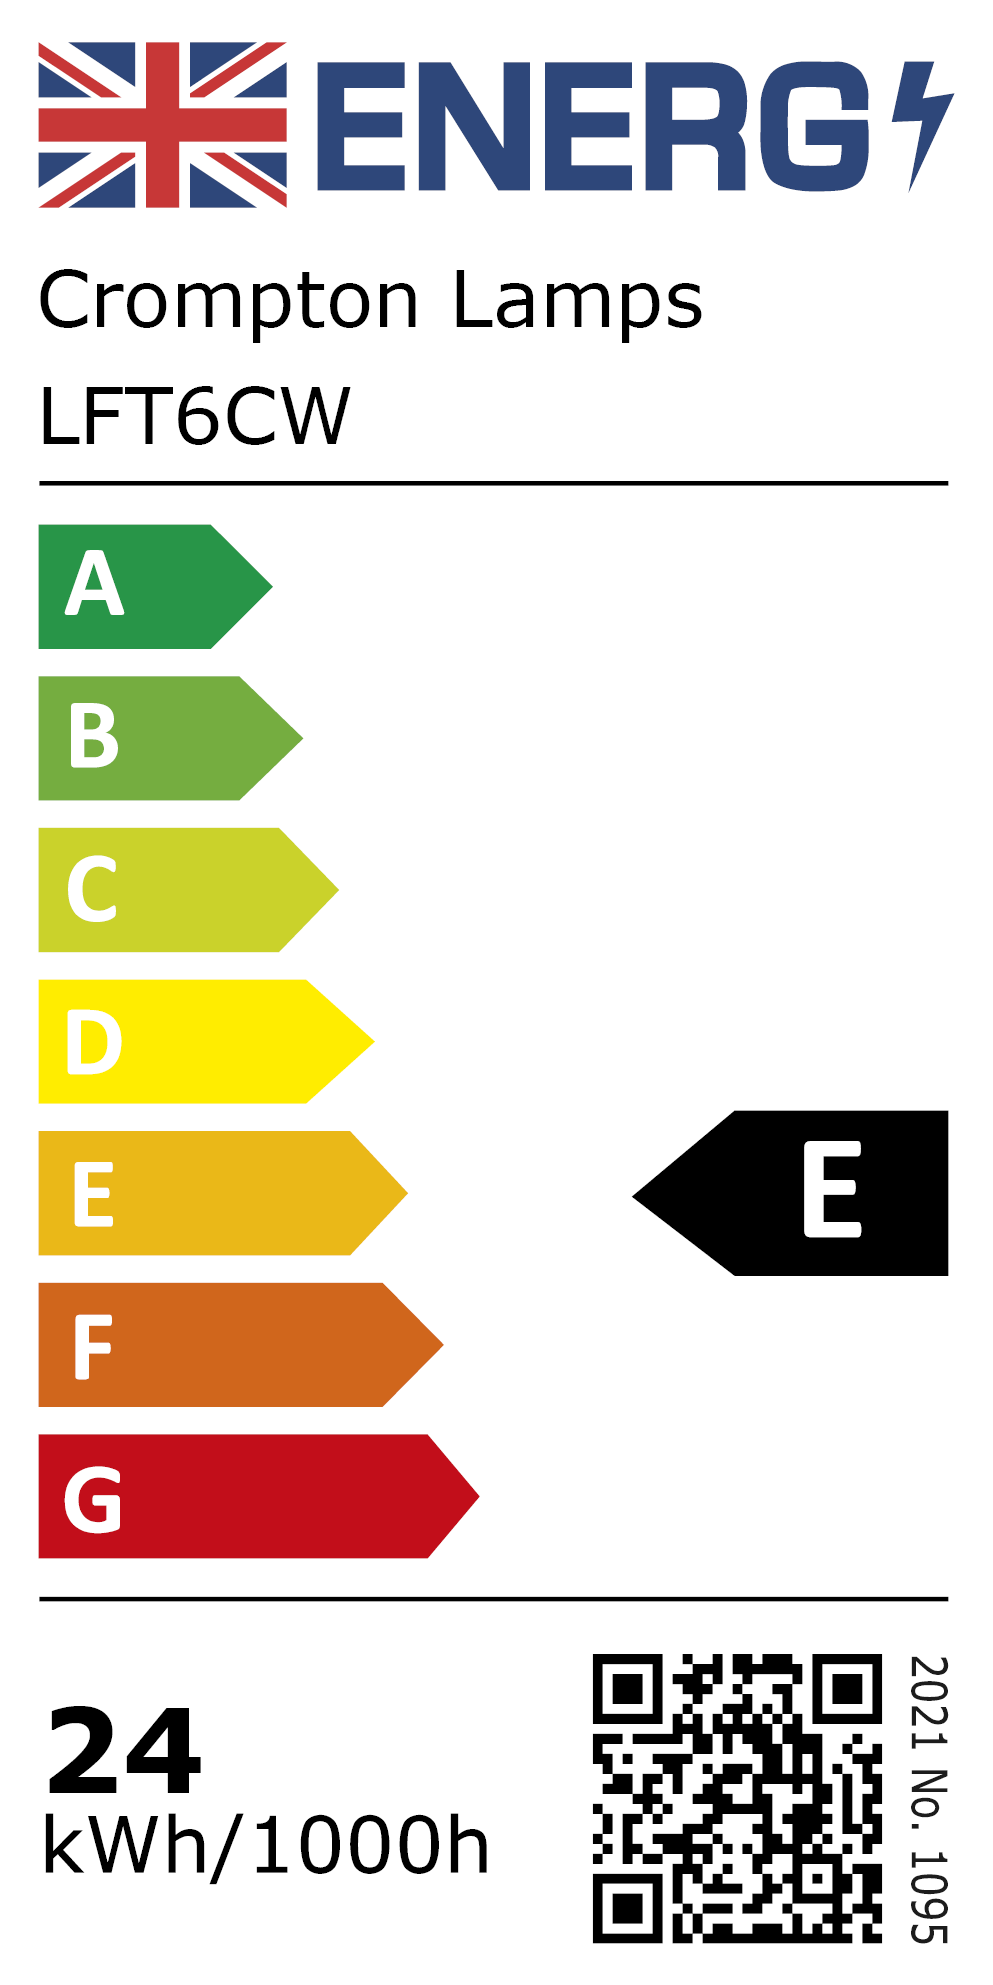 New 2021 Energy Rating Label: Stock Code LFT6CW